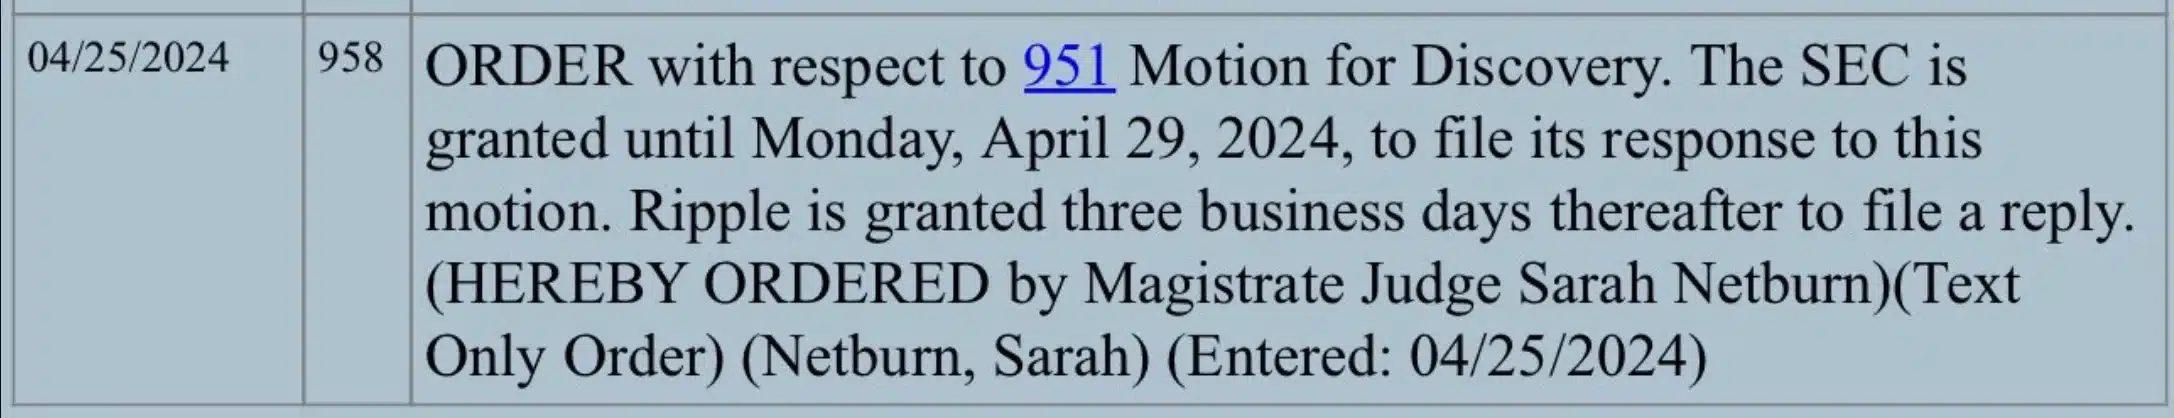 Magistrate Judge Sarah Netburn issues a scheduling order